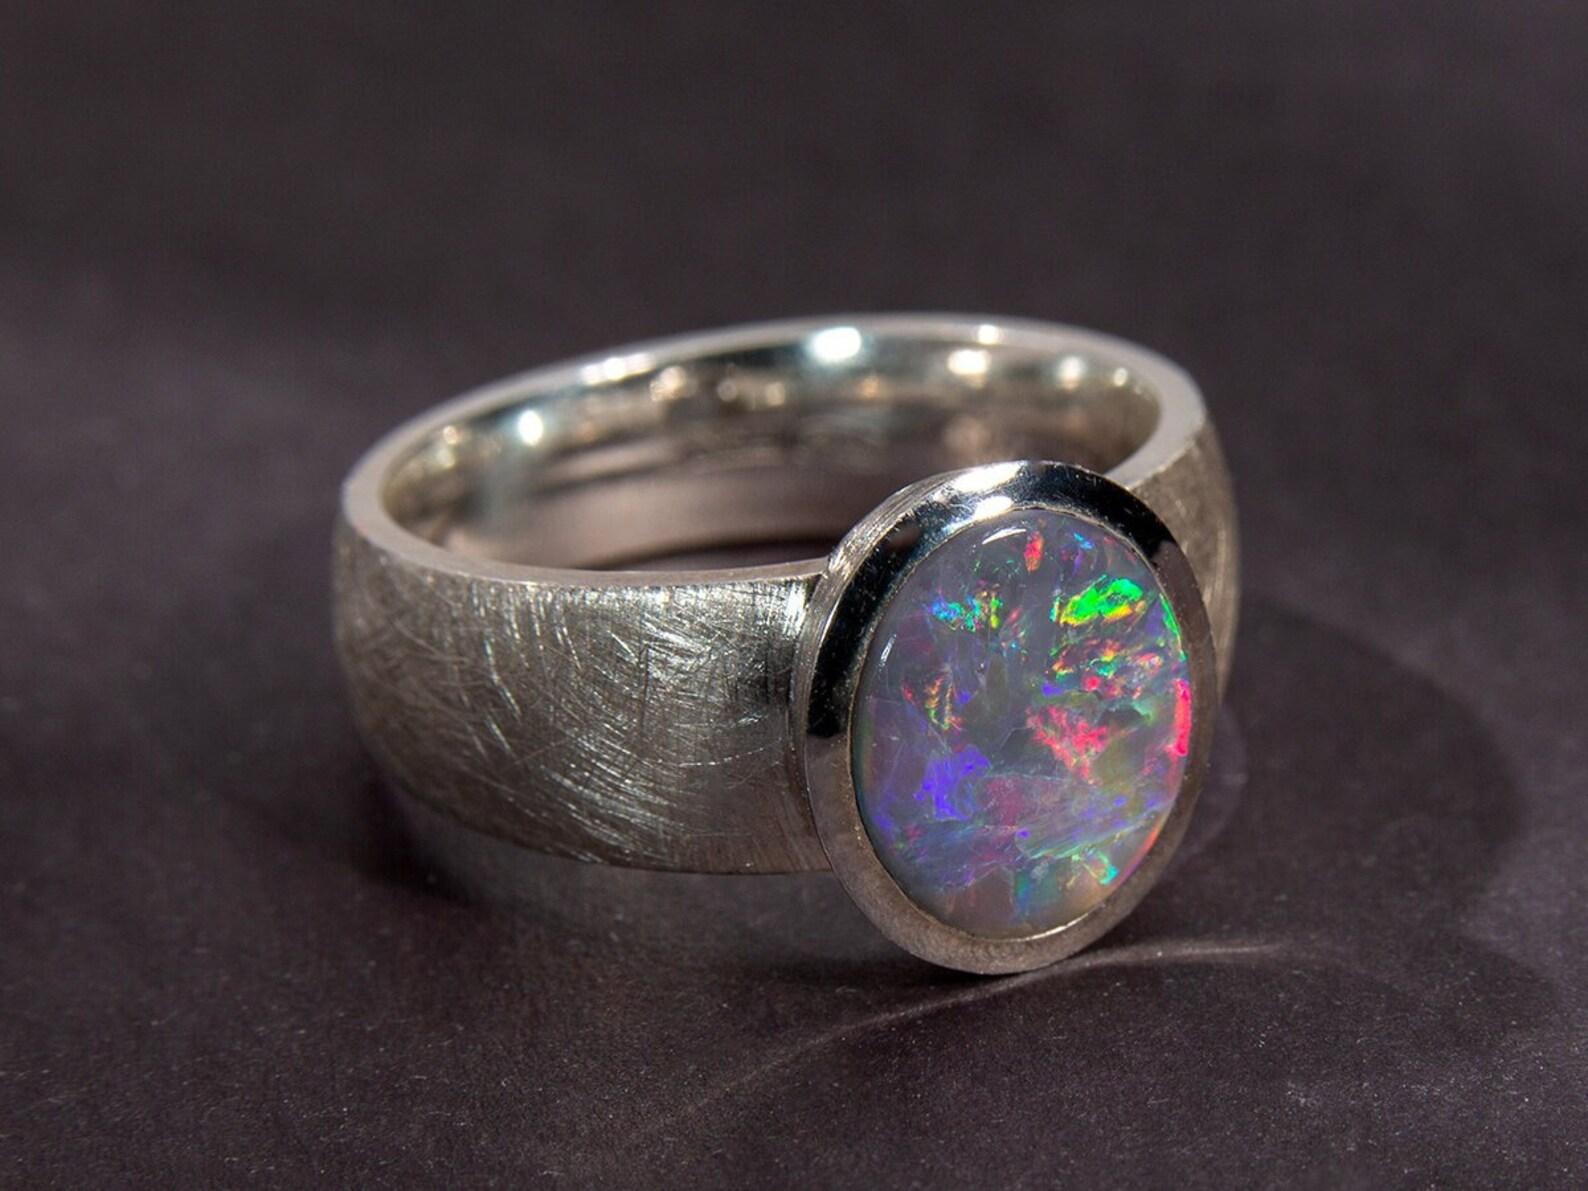 An impressive unisex matte finish silver ring with natural large cabochon-cut Black Opal
opal origin - Australia 
stone measurements - 0.35 х 0.43 in / 9 х 11 mm
ring weight - 7.19 grams
ring size - 8.5 US